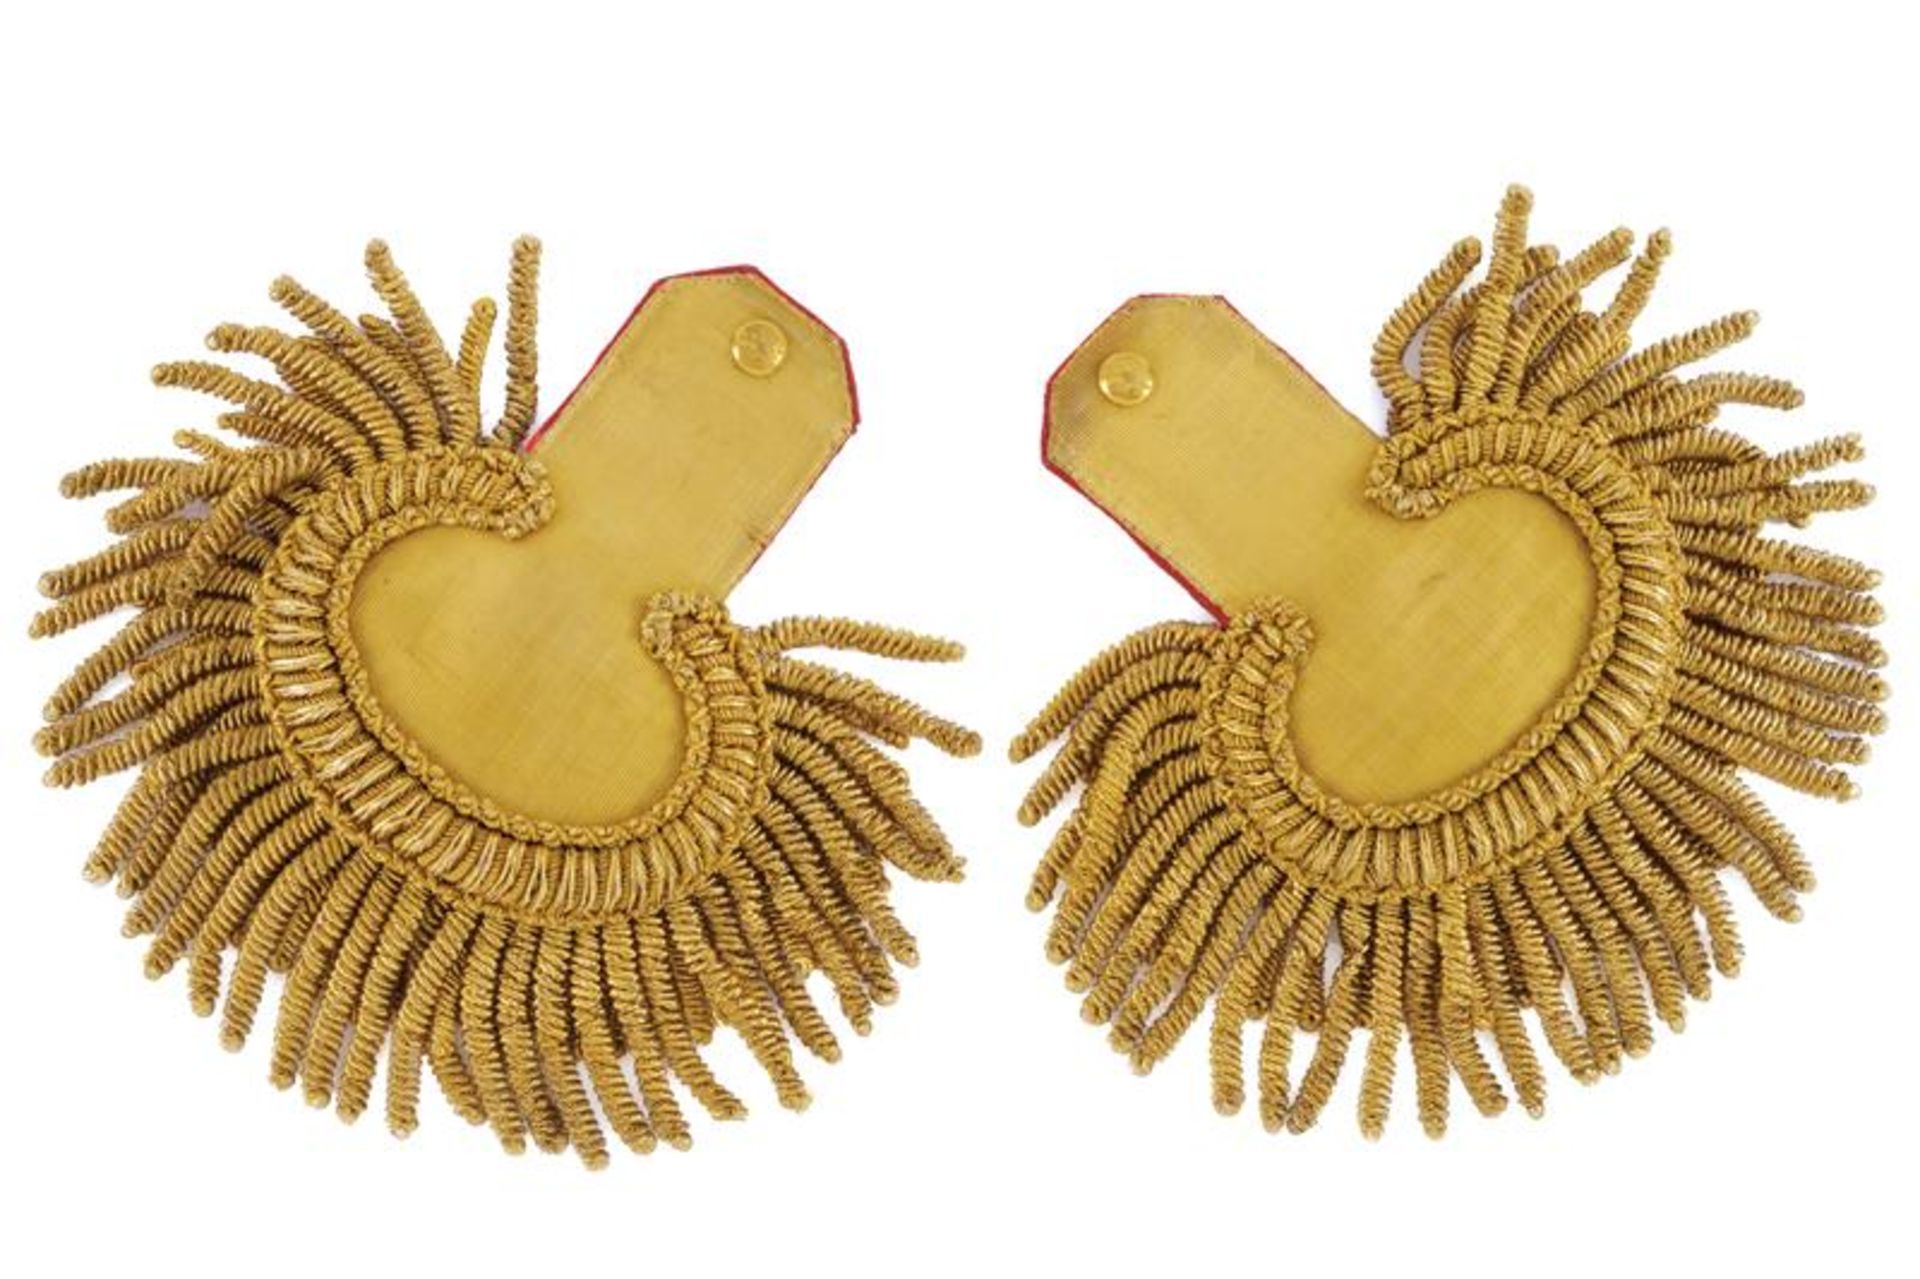 A pair of general's epaulettes